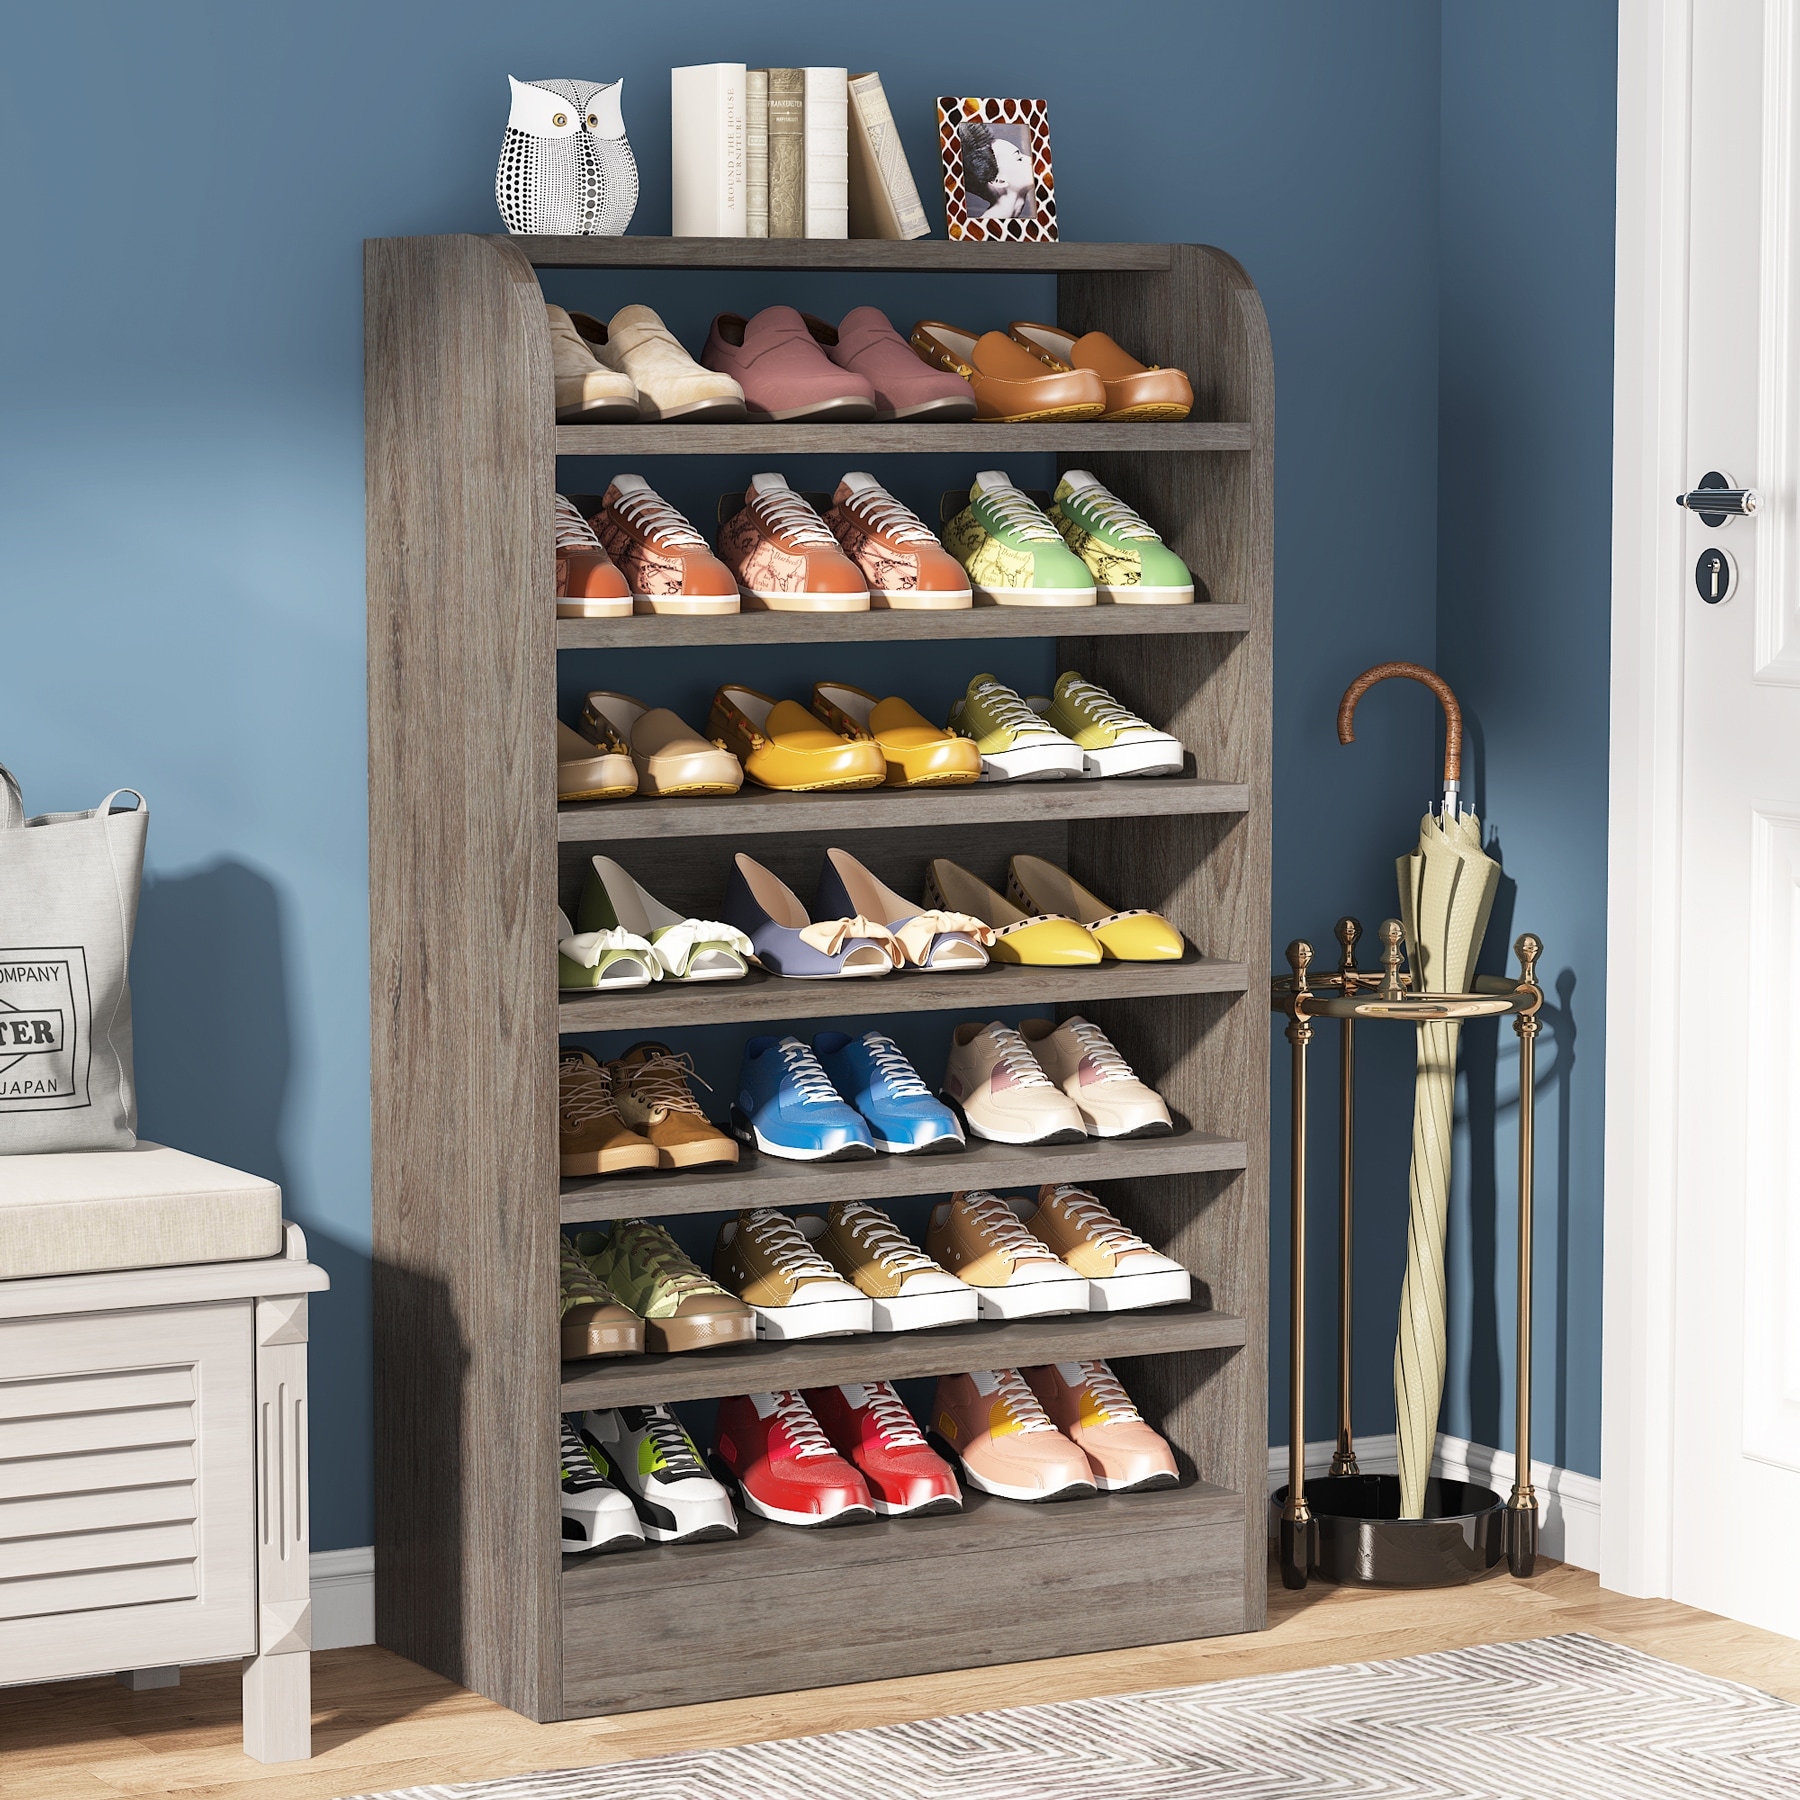 https://ak1.ostkcdn.com/images/products/is/images/direct/43cbf068ac9ea9b006ee7a4b3d2315e11734695a/Shoe-Cabinet-for-Entryway%2C-8-Tier-Tall-Shoe-Shelf-Shoes-Rack-Organizer%2C-Wooden-Shoe-Storage-Cabinet-for-Hallway%2C-Closet.jpg